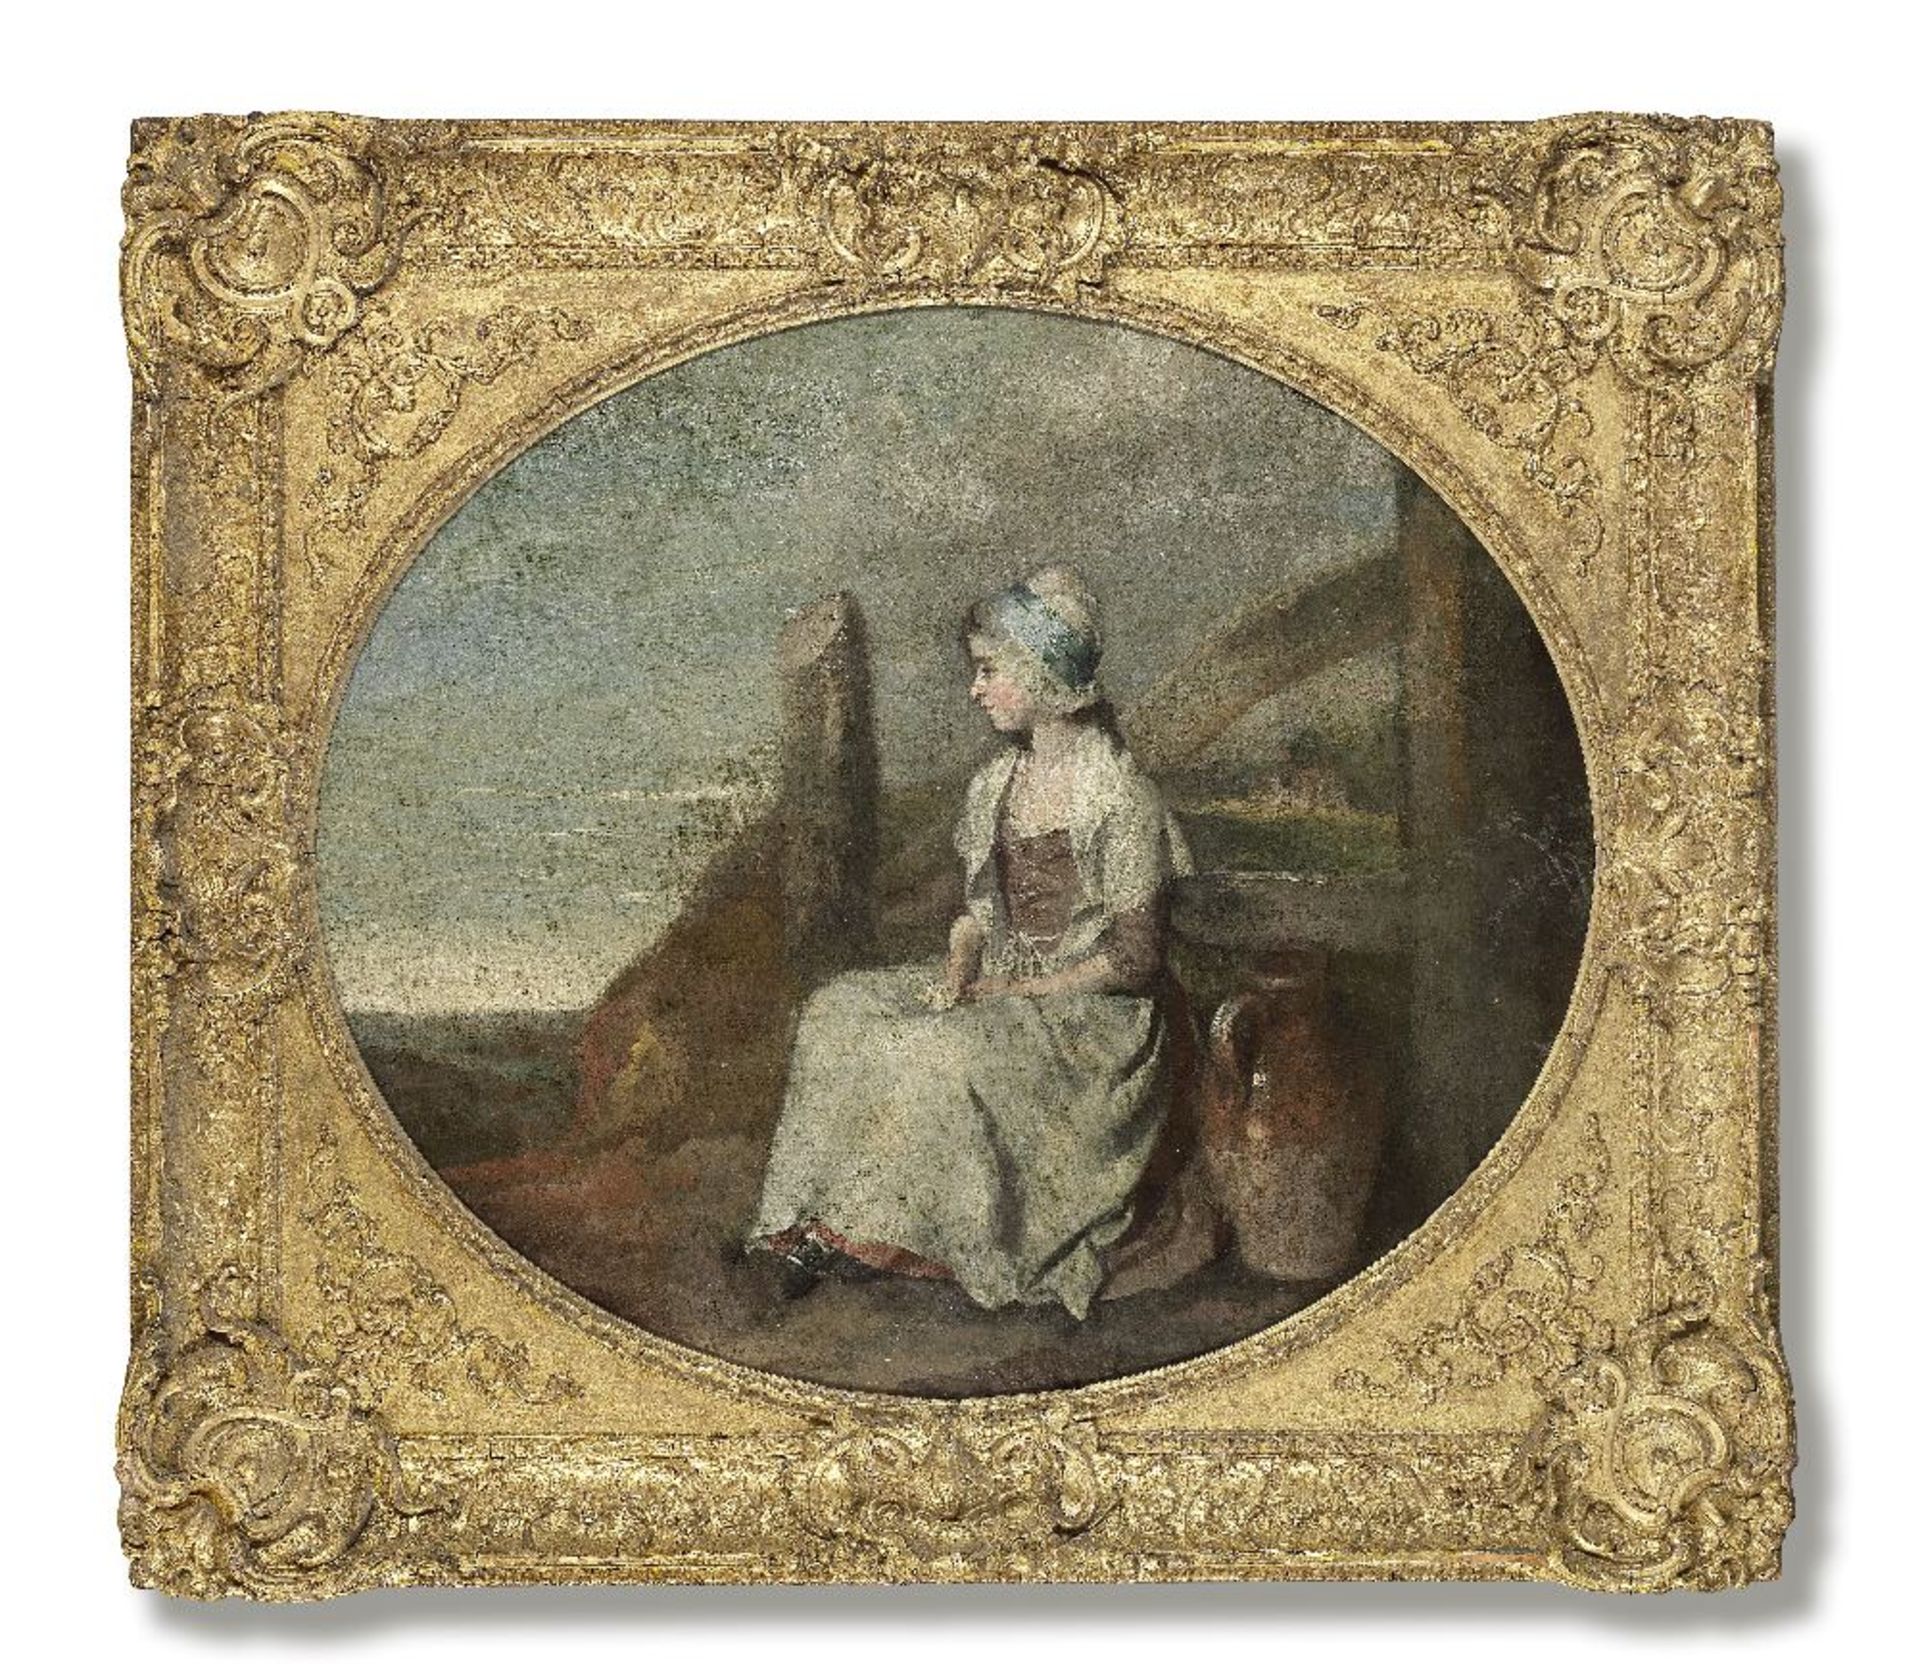 English School, circa 1800 Study of a girl seated by a well